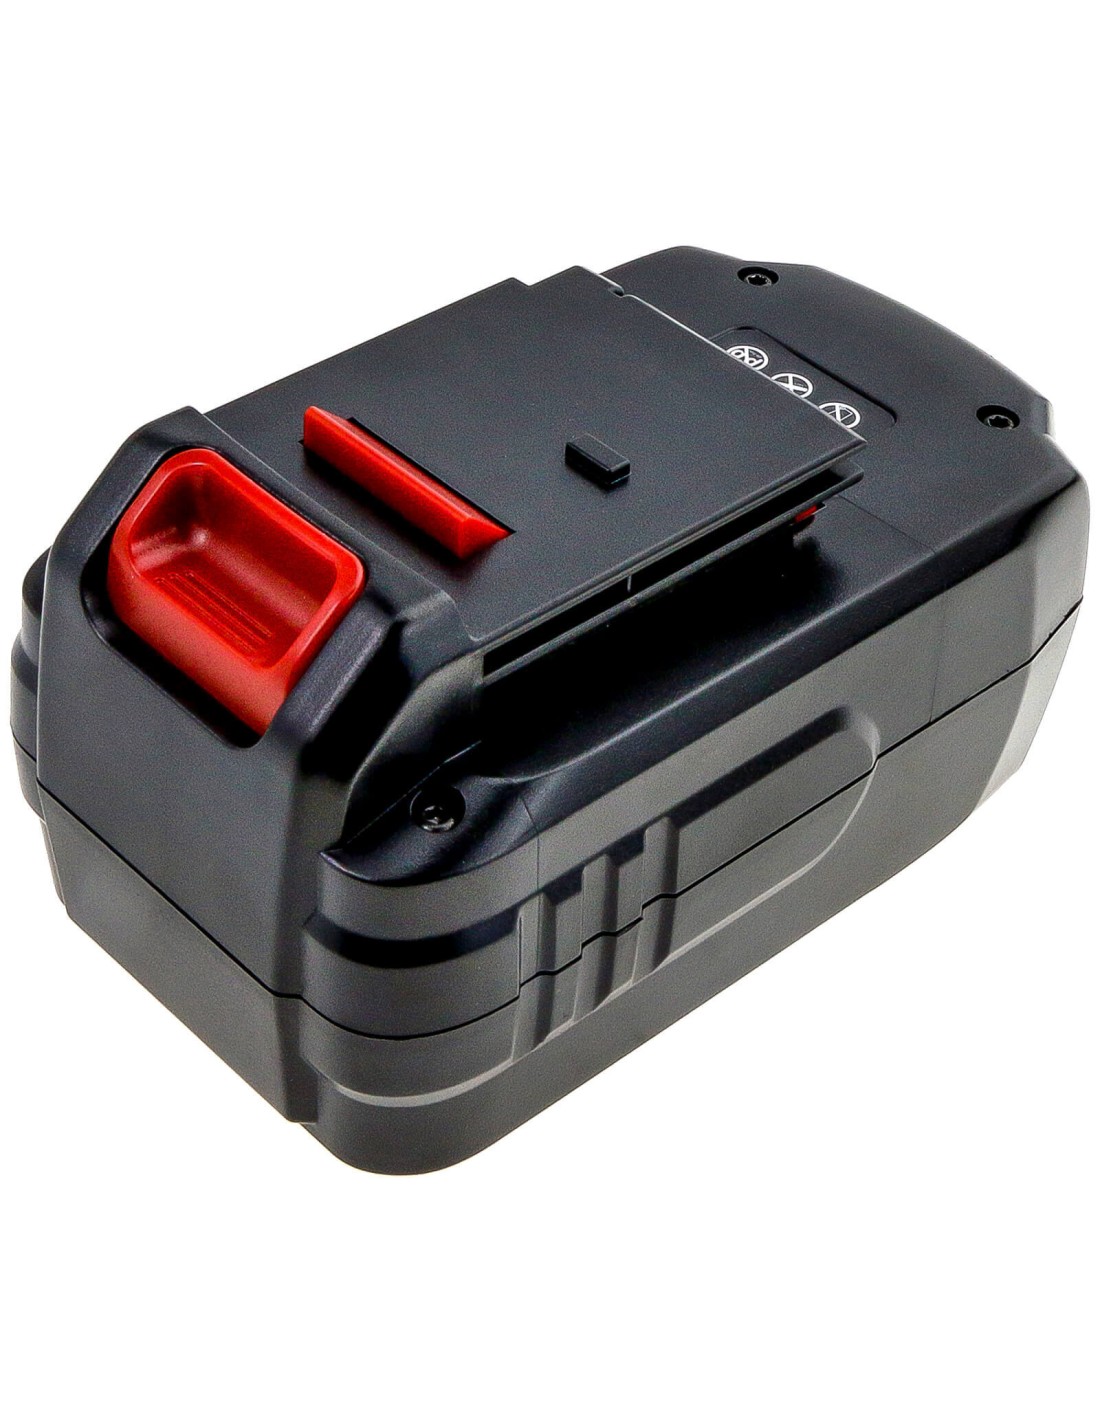 Battery for Porter Cable, Pc18ag, Pc18al, Pc18chd 18V, 4000mAh - 72.00Wh